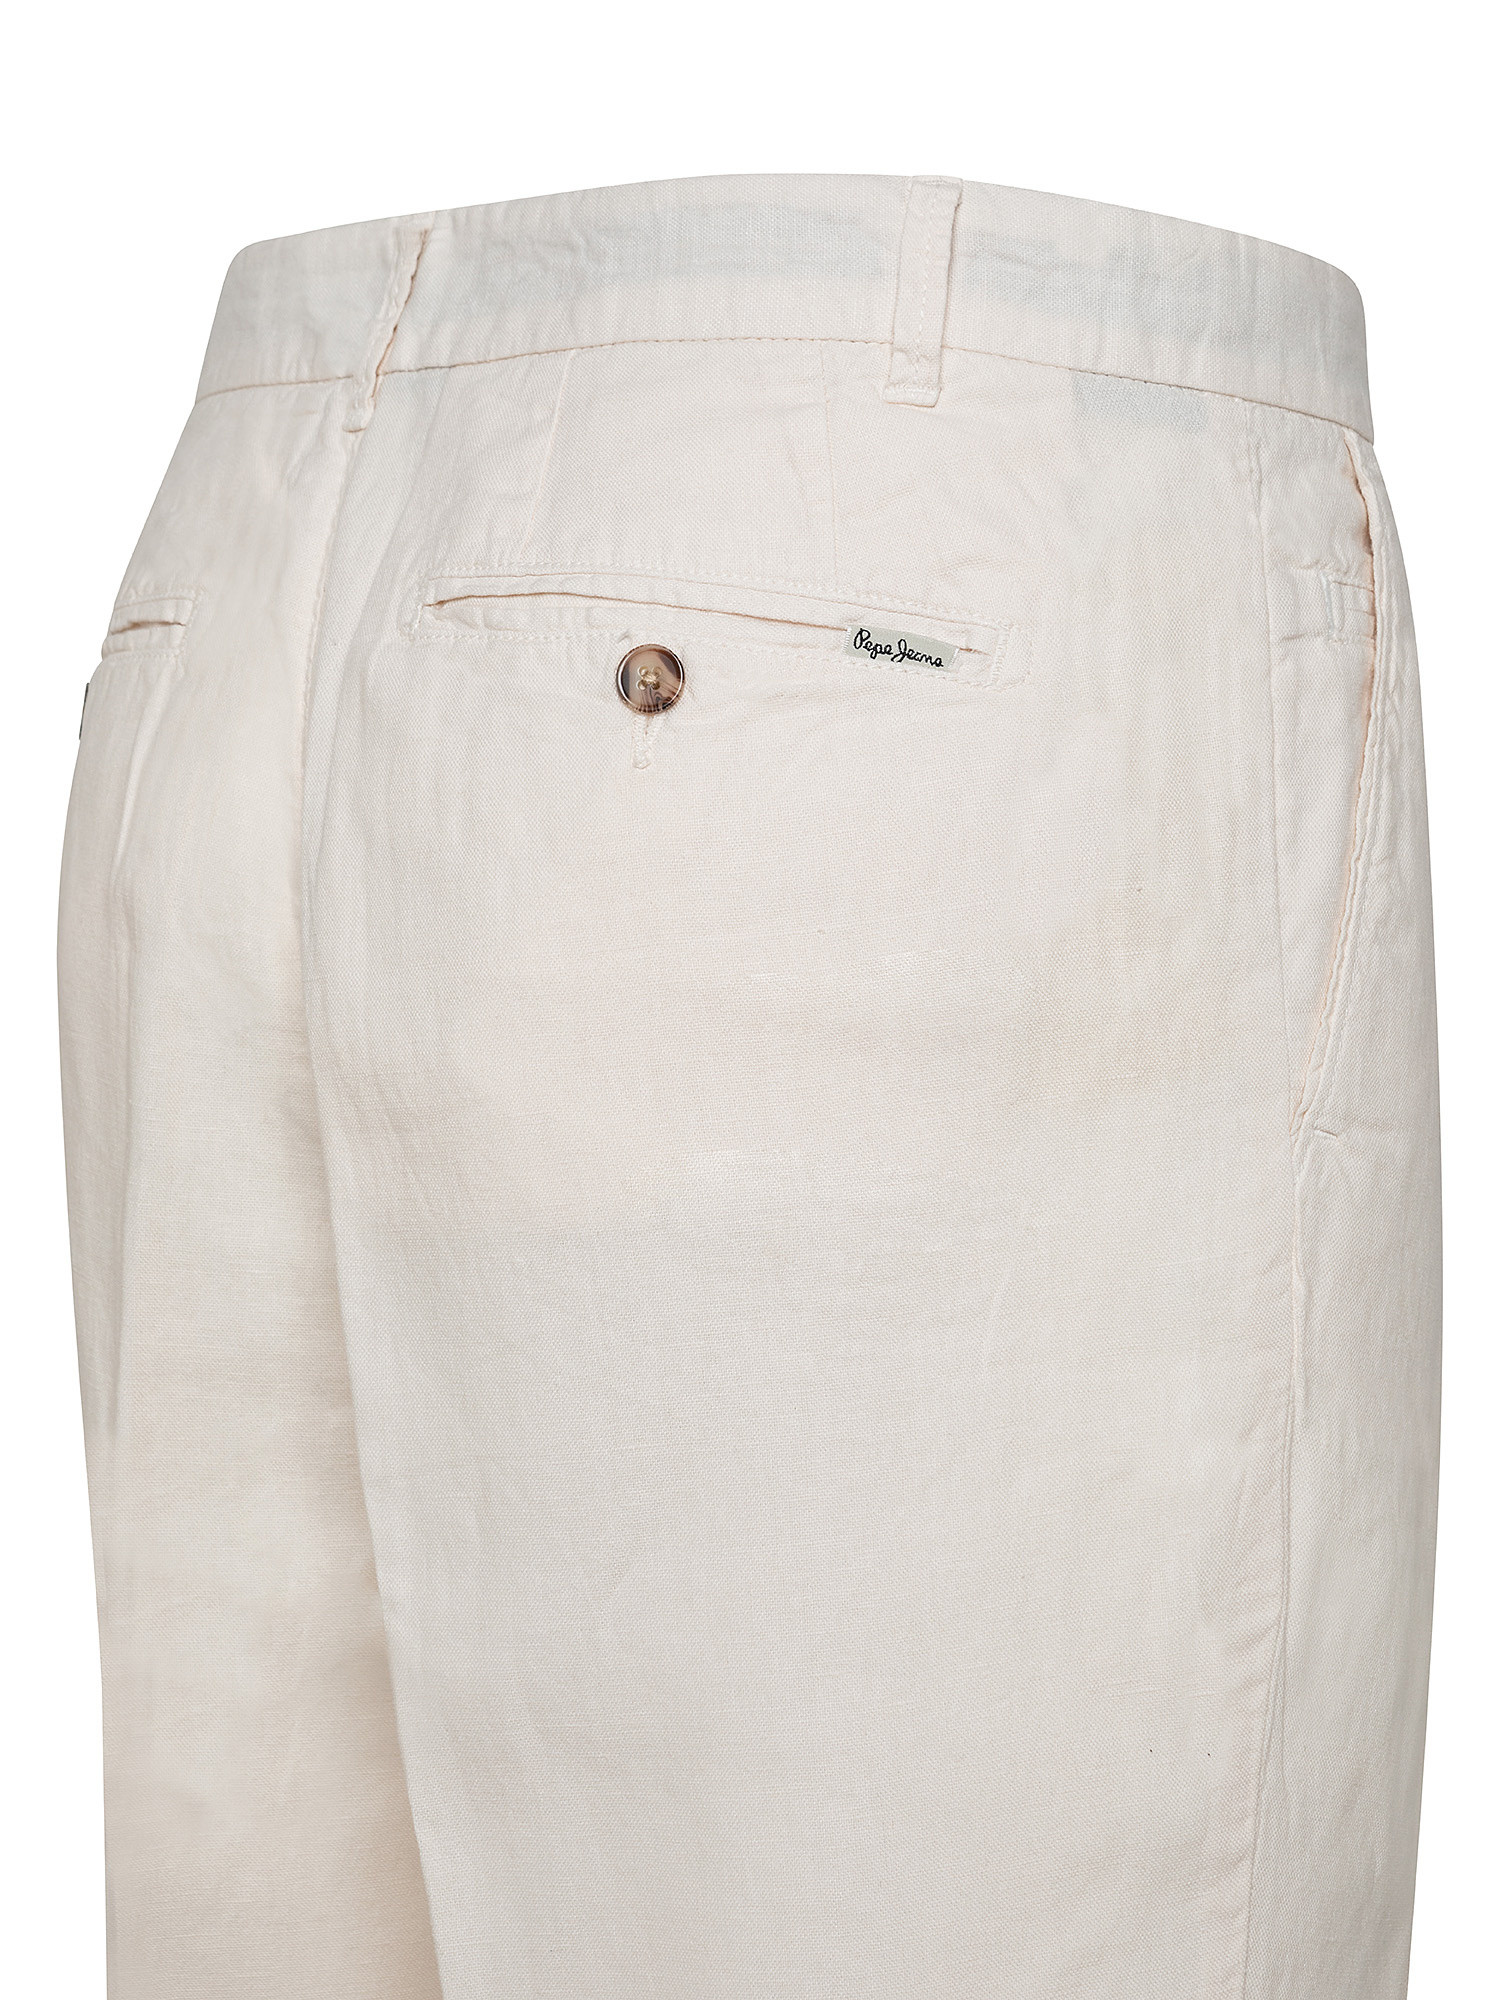 Linen blend trousers, White Cream, large image number 2